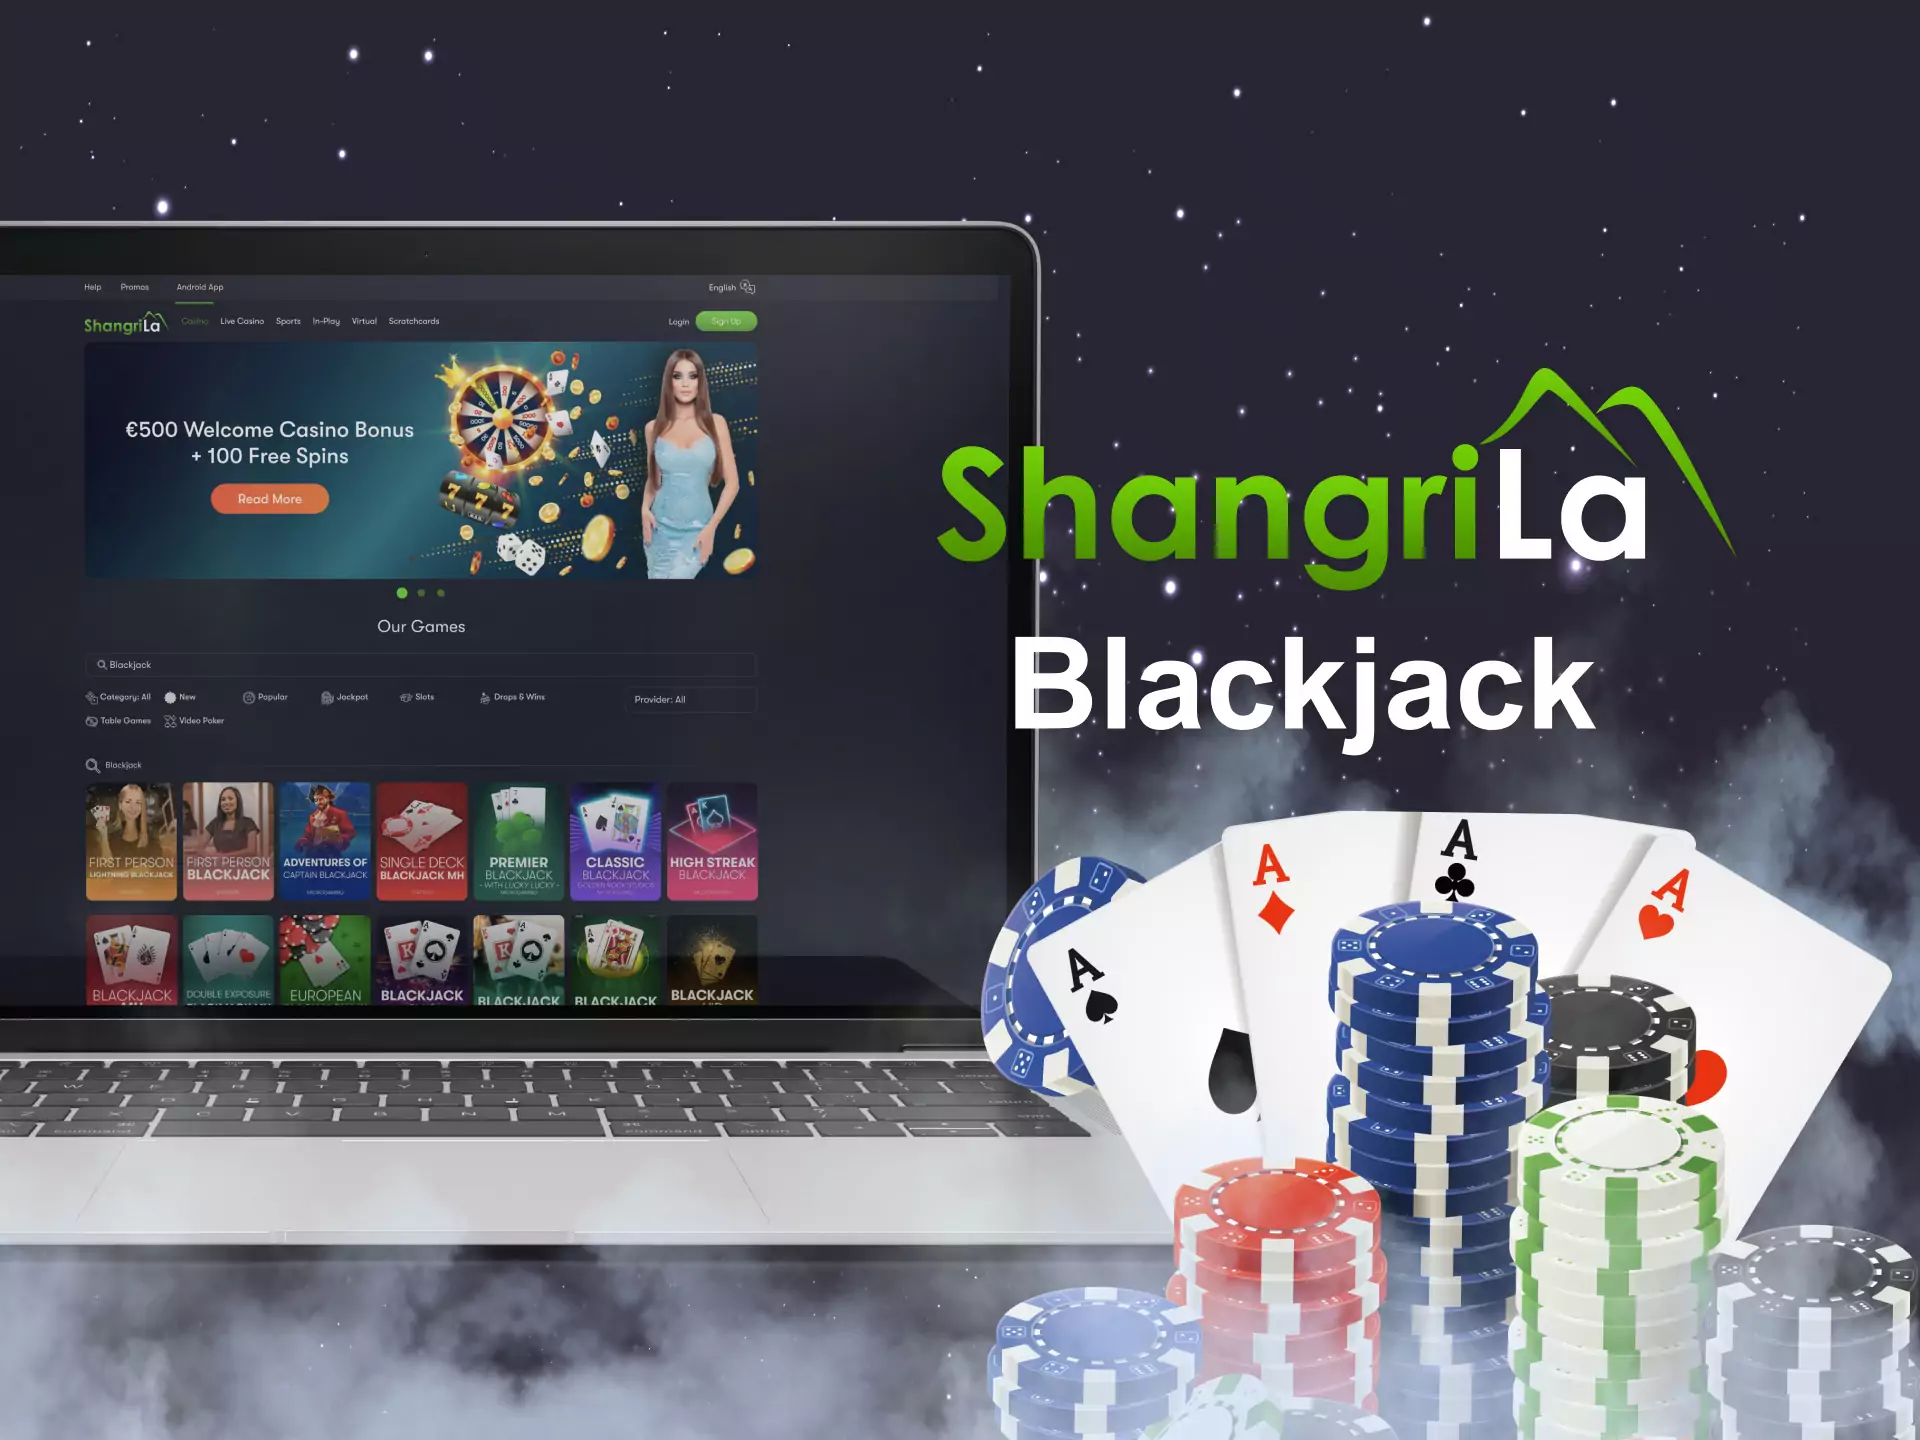 Blackjack is a card game that Shangri La online casino also provides for users.